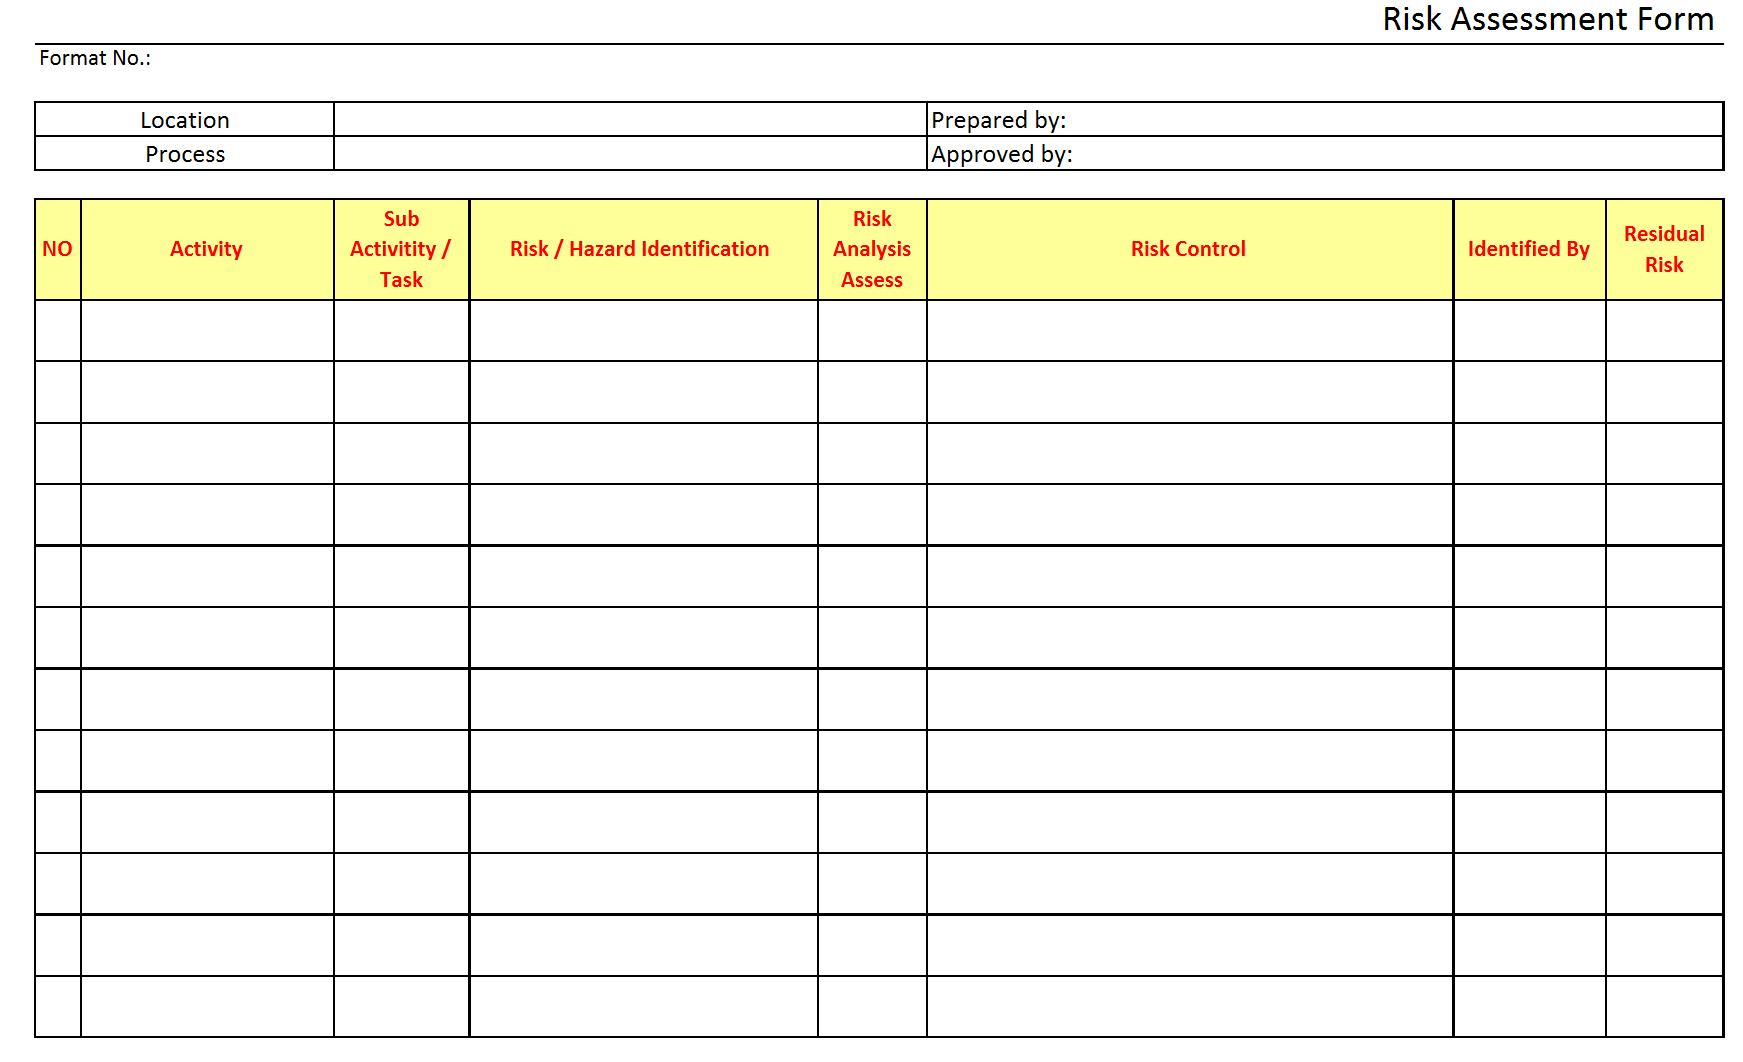 Risk assessment form - With Fmea Risk Analysis Template Regarding Fmea Risk Analysis Template